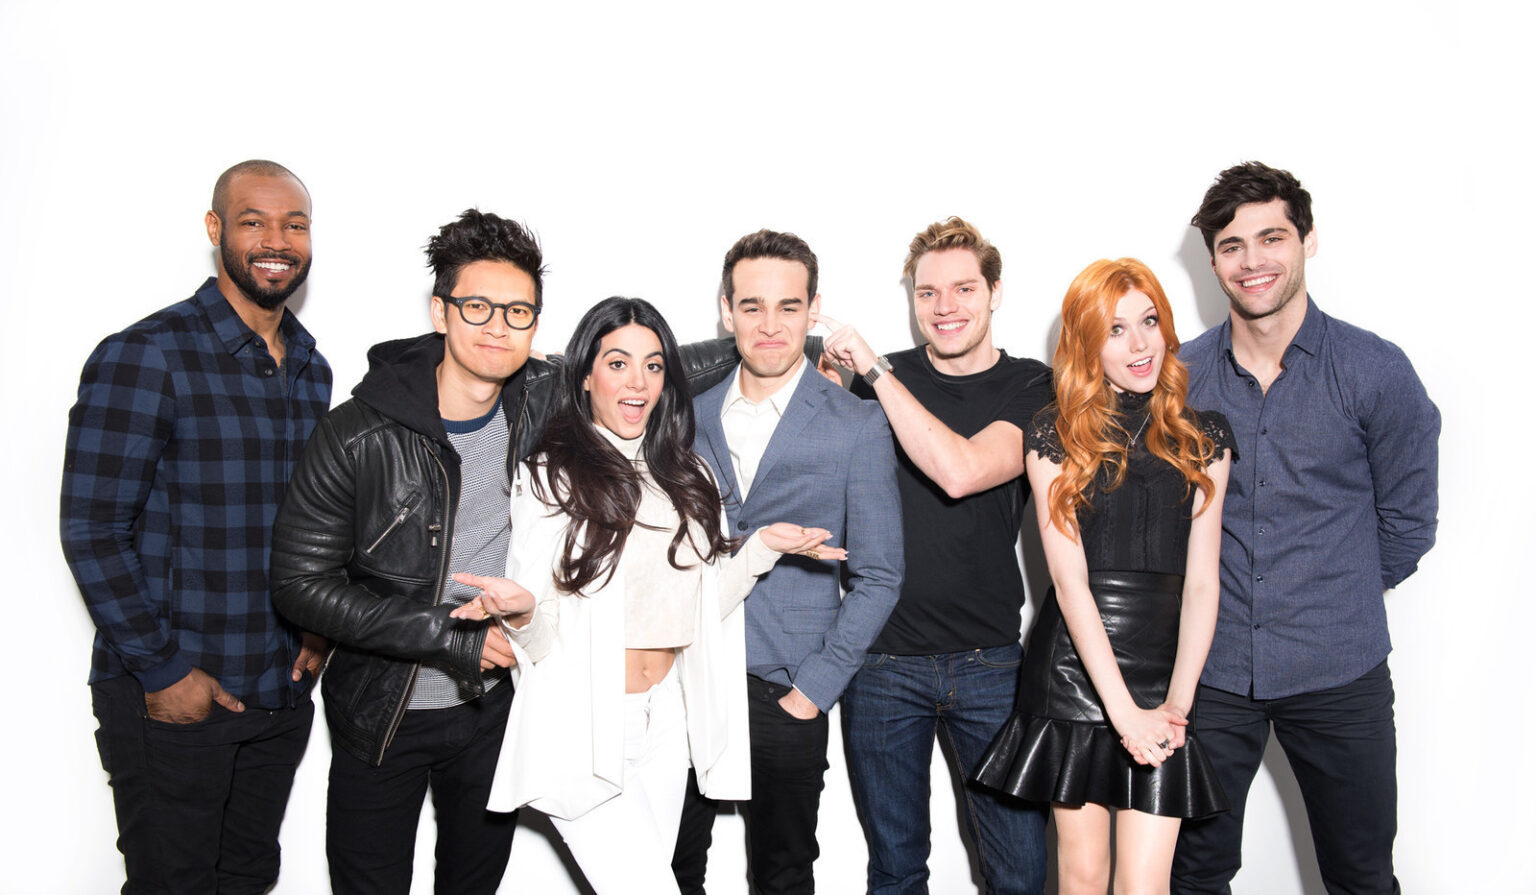 Even after the abrupt cancellation, 'Shadowhunters' and its fandom is still very much alive. Where are the cast now?